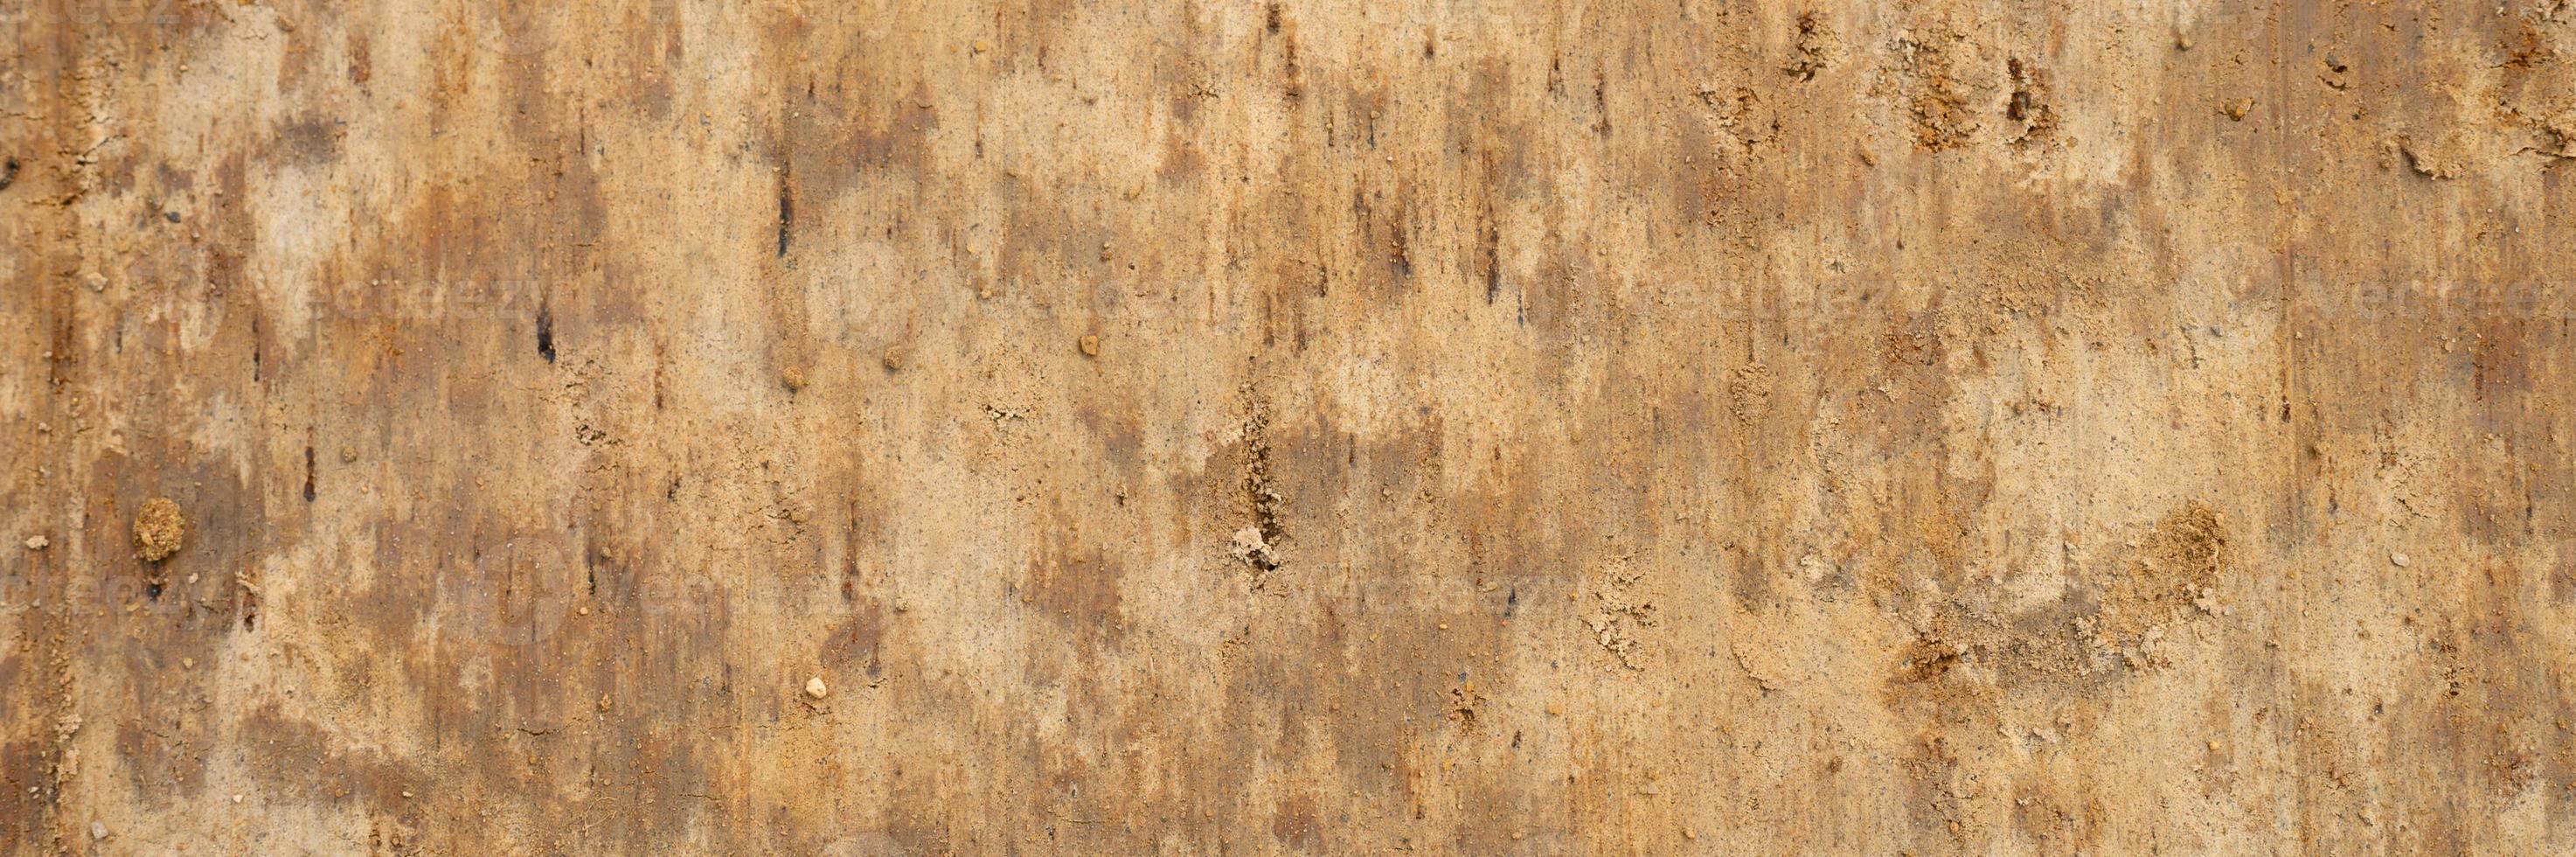 Background texture from the smooth surface of the wood sand photo